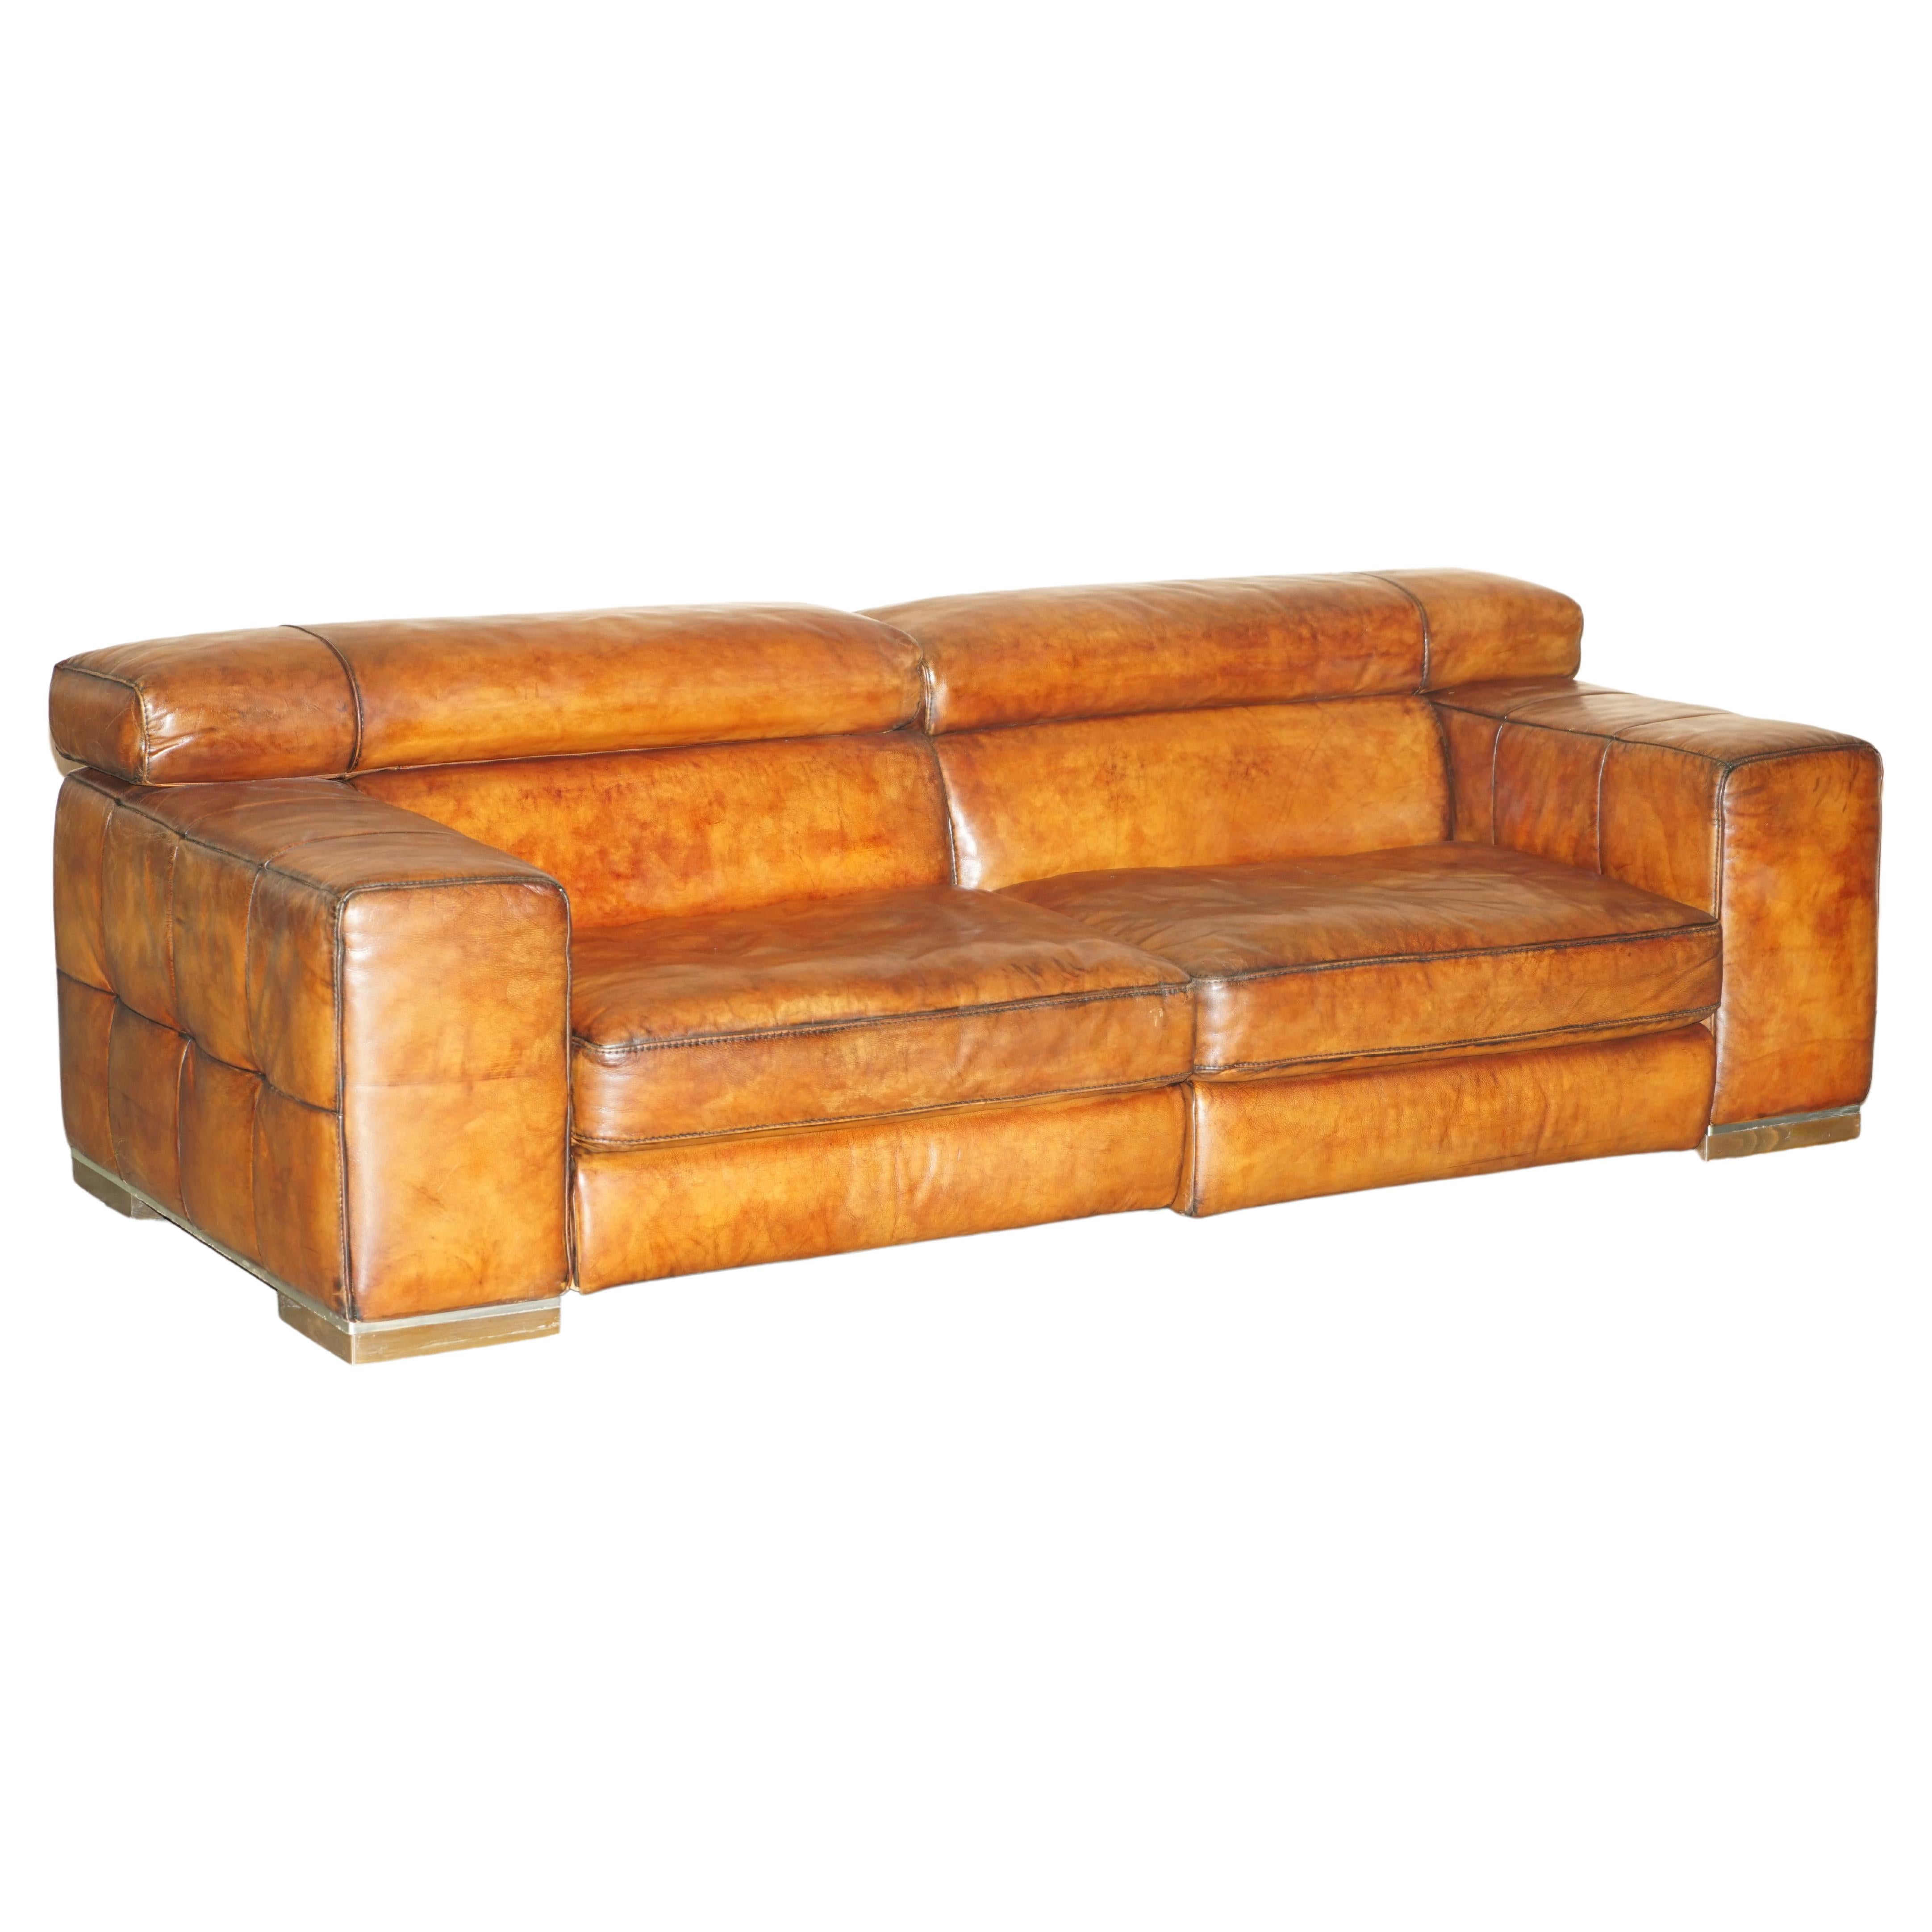 Natuzzi Roma Cigar Brown Leather Sofa Electric Raising Headrest Part of a Suite For Sale